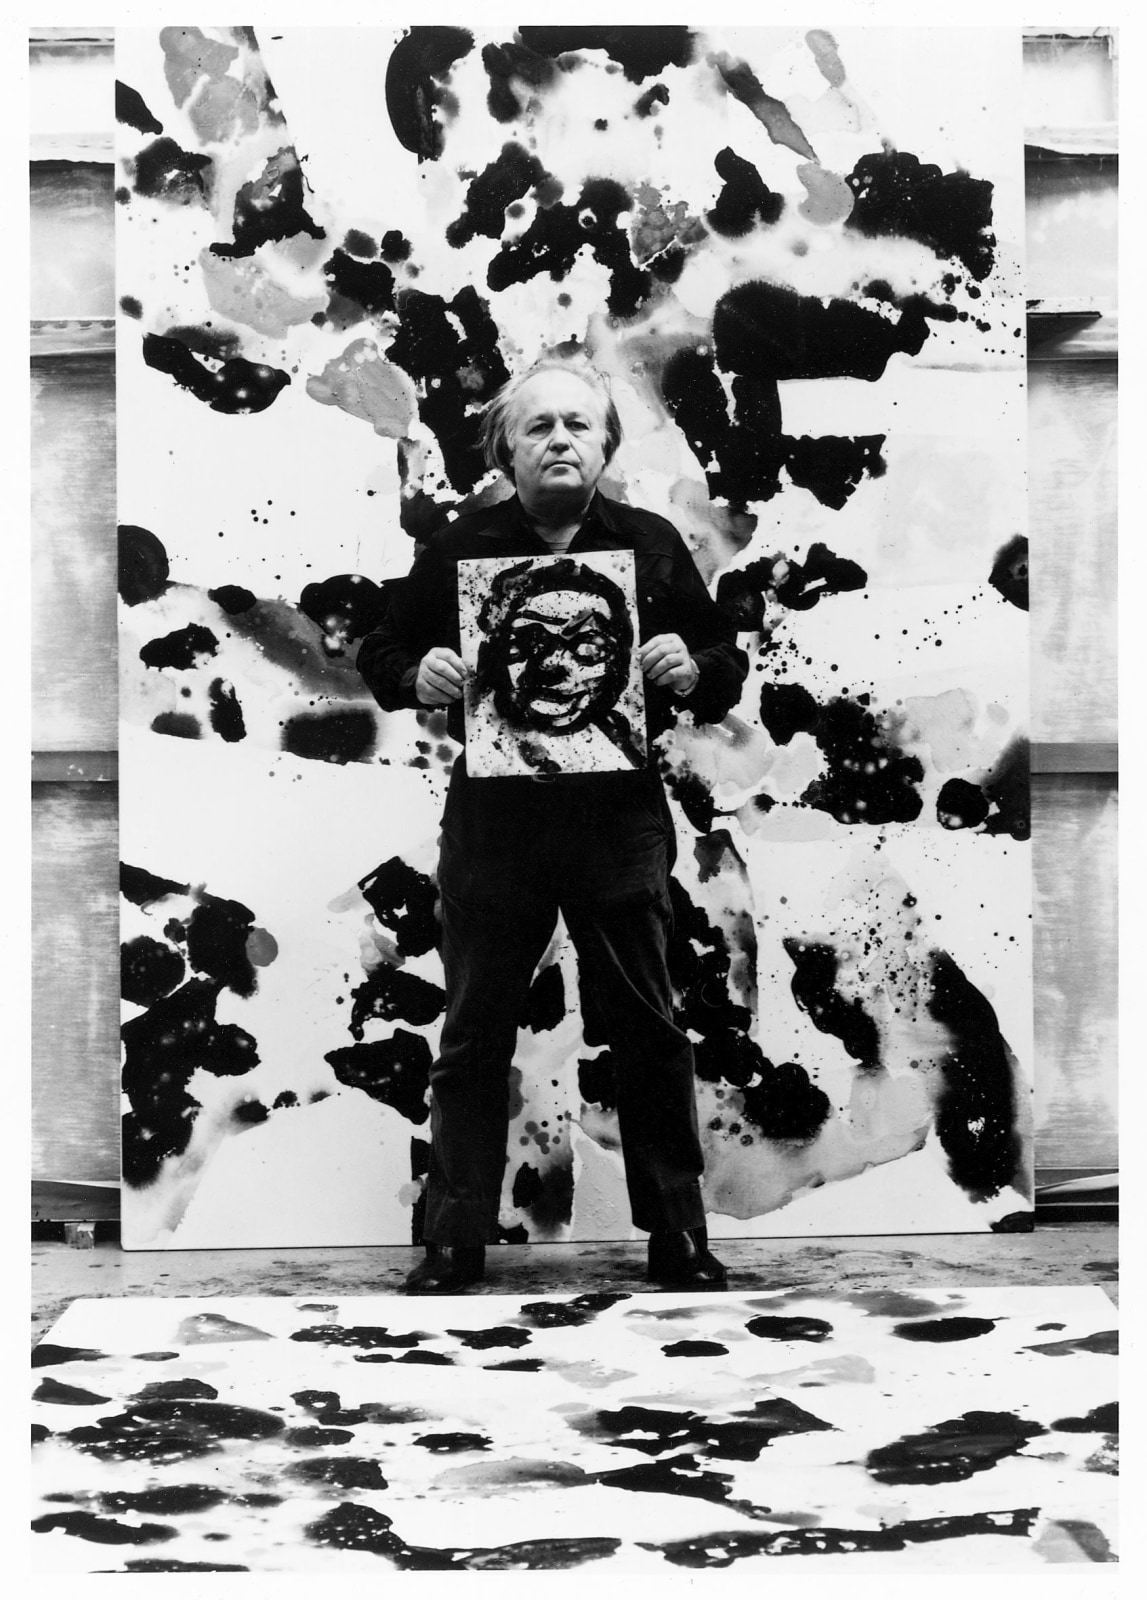 Sam Francis featured in Hyperallergic